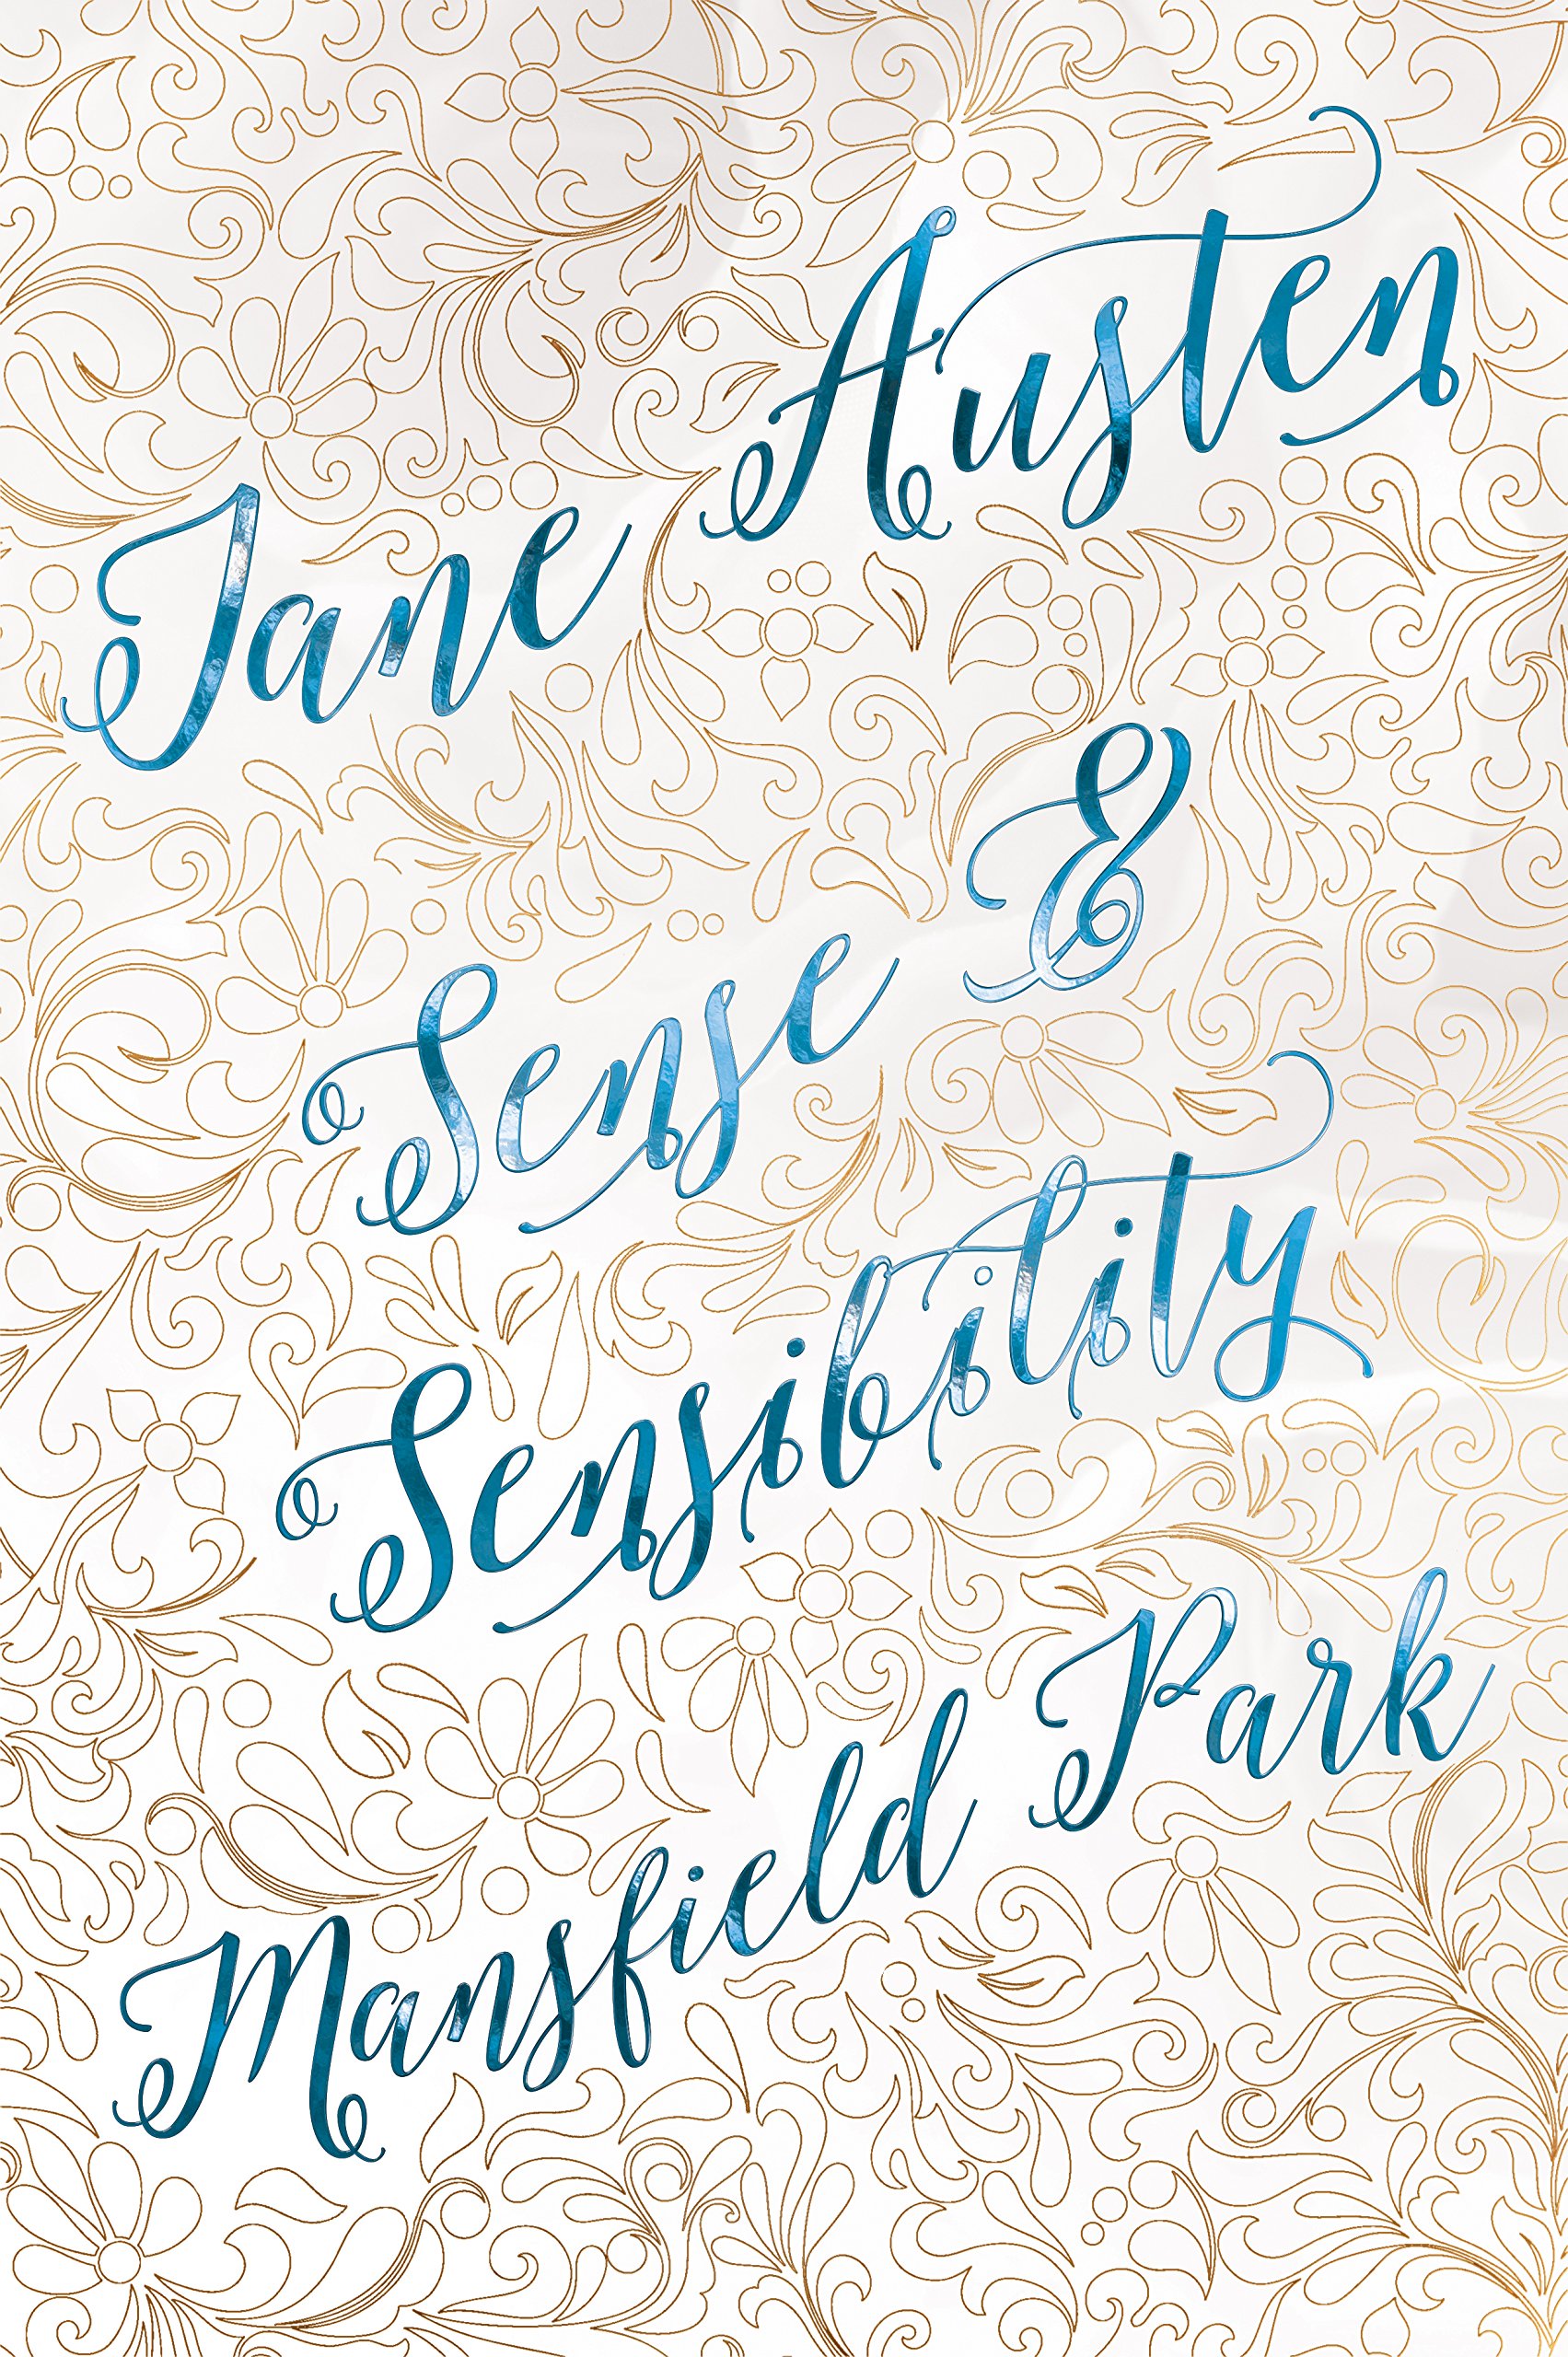 Sense and Sensibility / Mansfield Park - Deluxe Edition